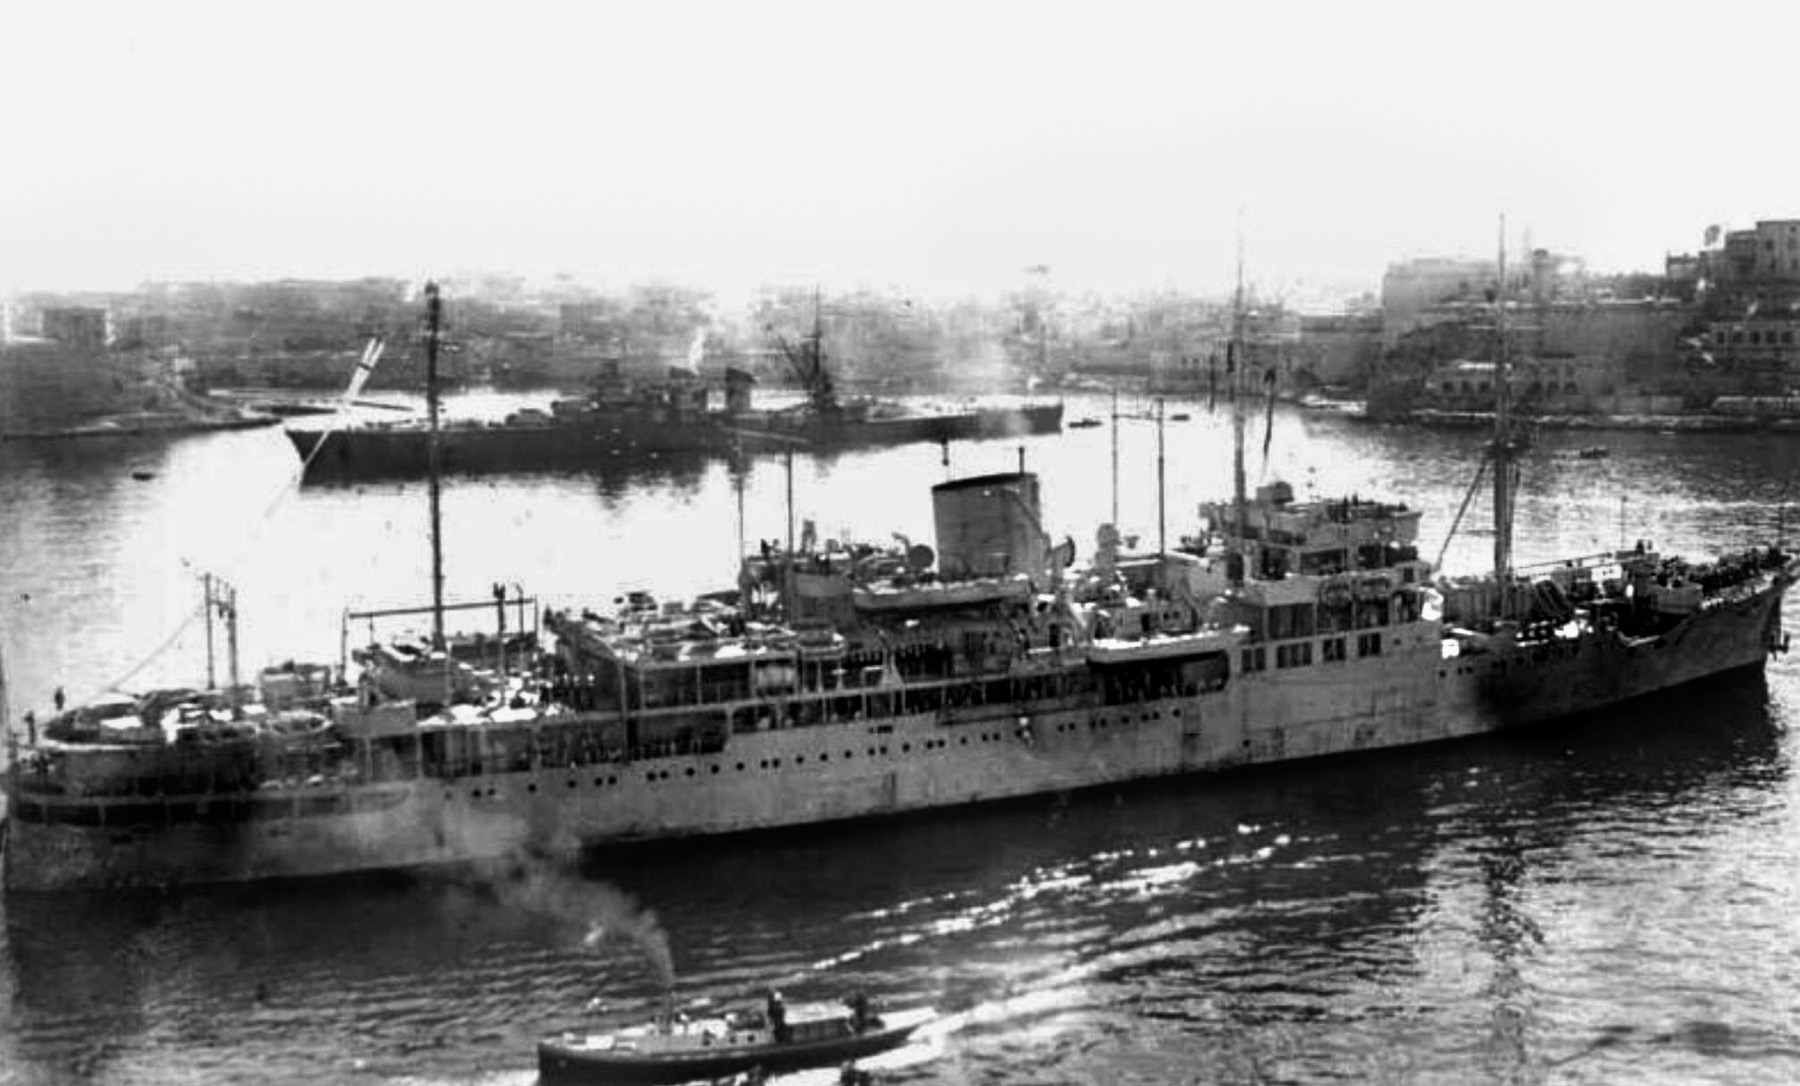 Accompanied by U.S. troops, 30 AU arrived at Algiers in North Africa aboard HMS Bulolo, a converted passenger liner, as part of Operation Torch, November 9, 1942. 